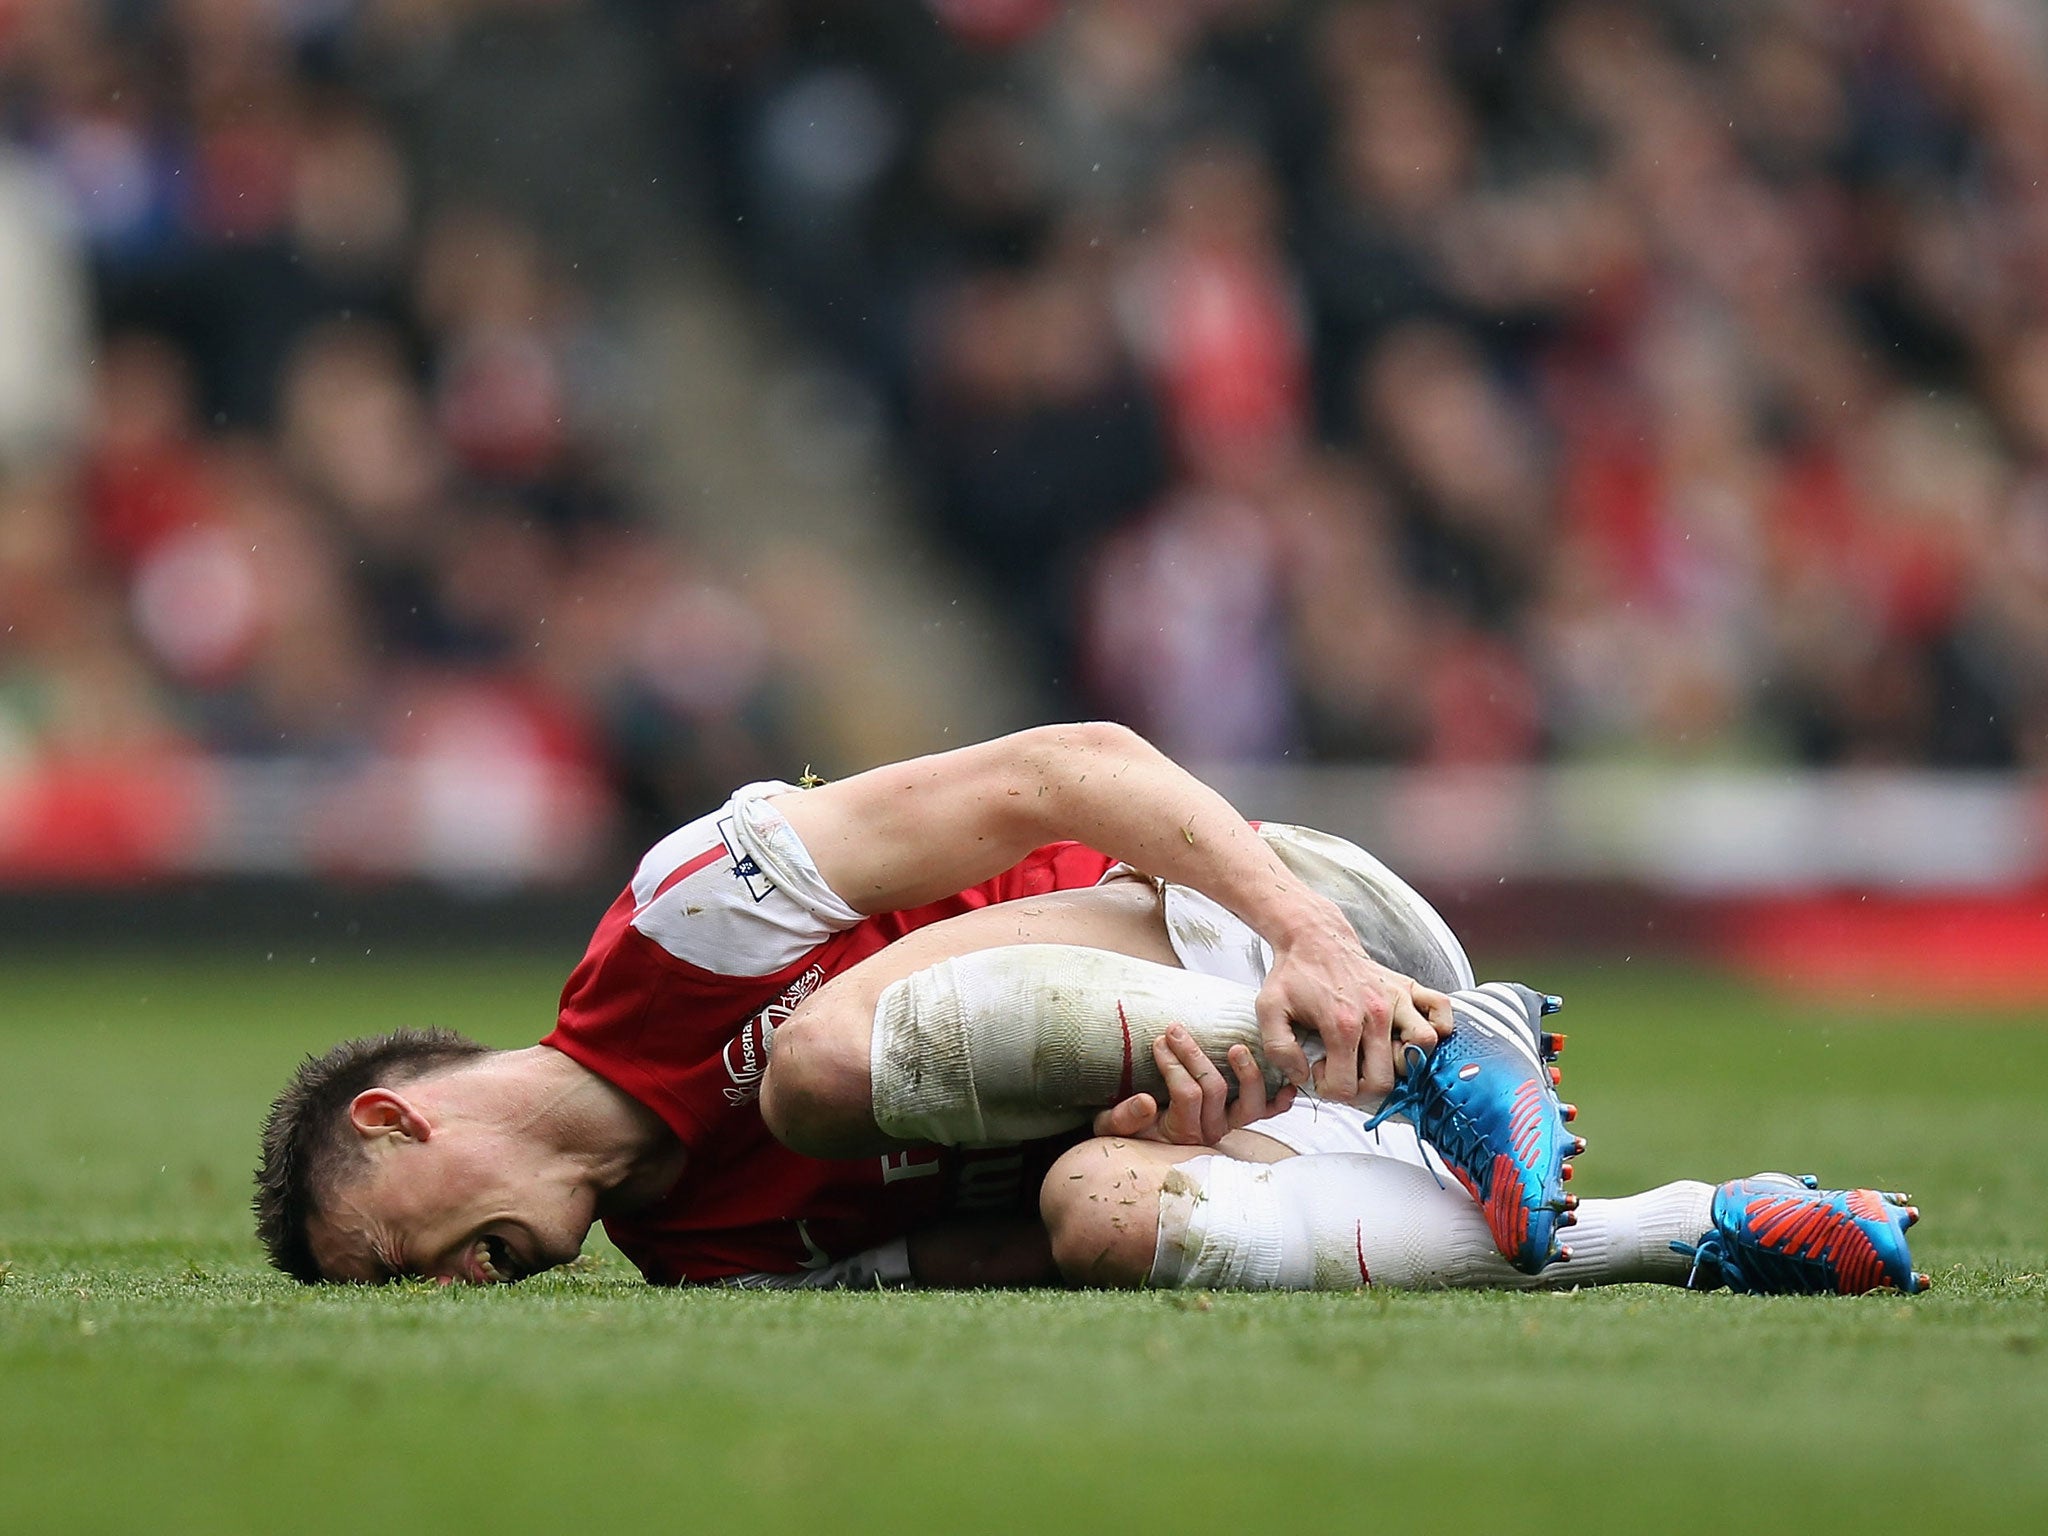 Laurent Koscielny has picked up an ankle injury and will miss the match against Hull